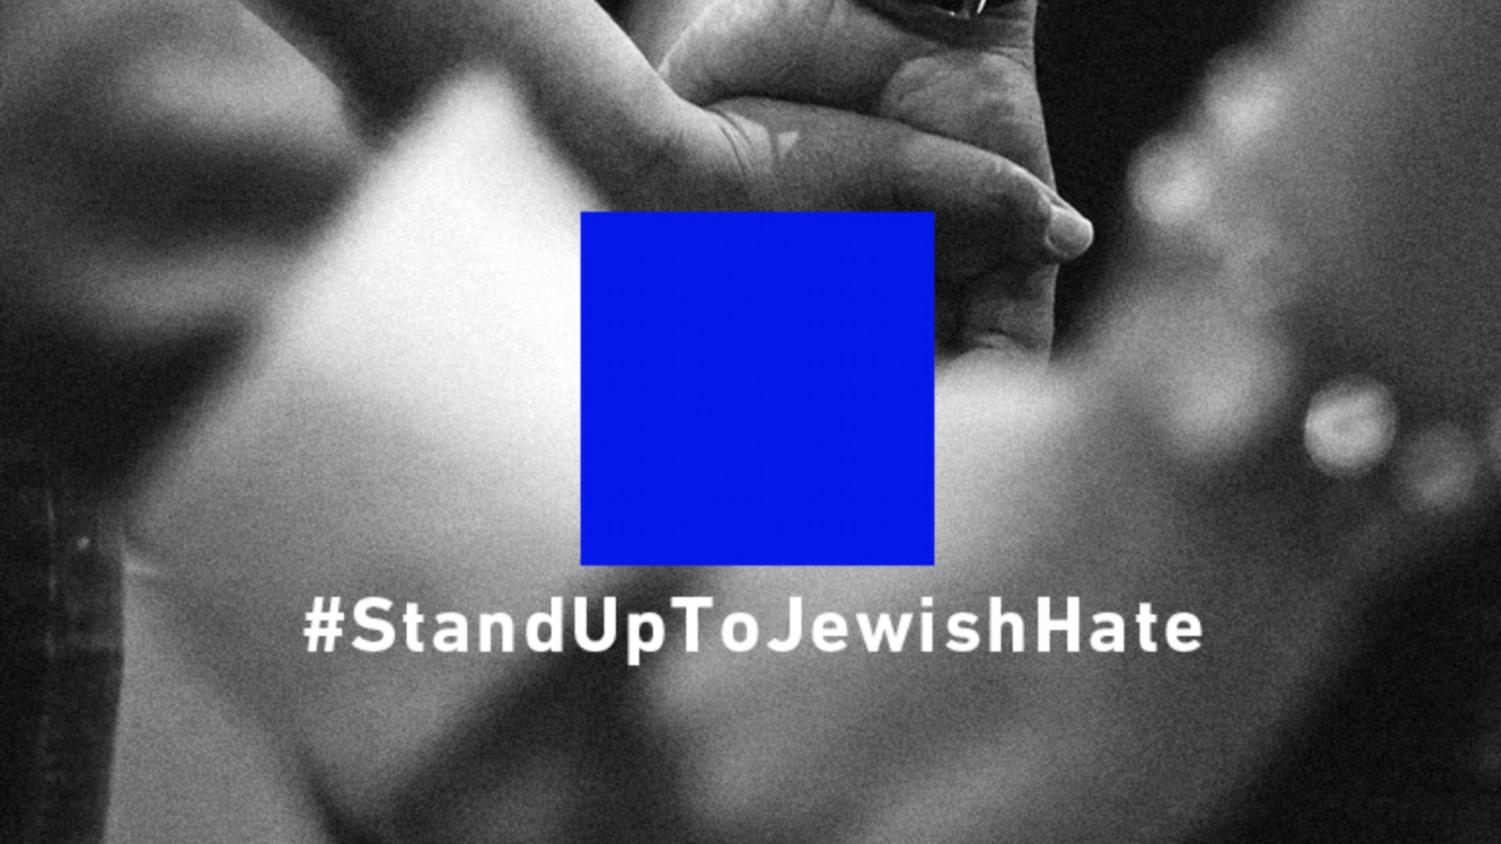 How you can join new social campaign 'Stand Up To Jewish Hate' - St ...